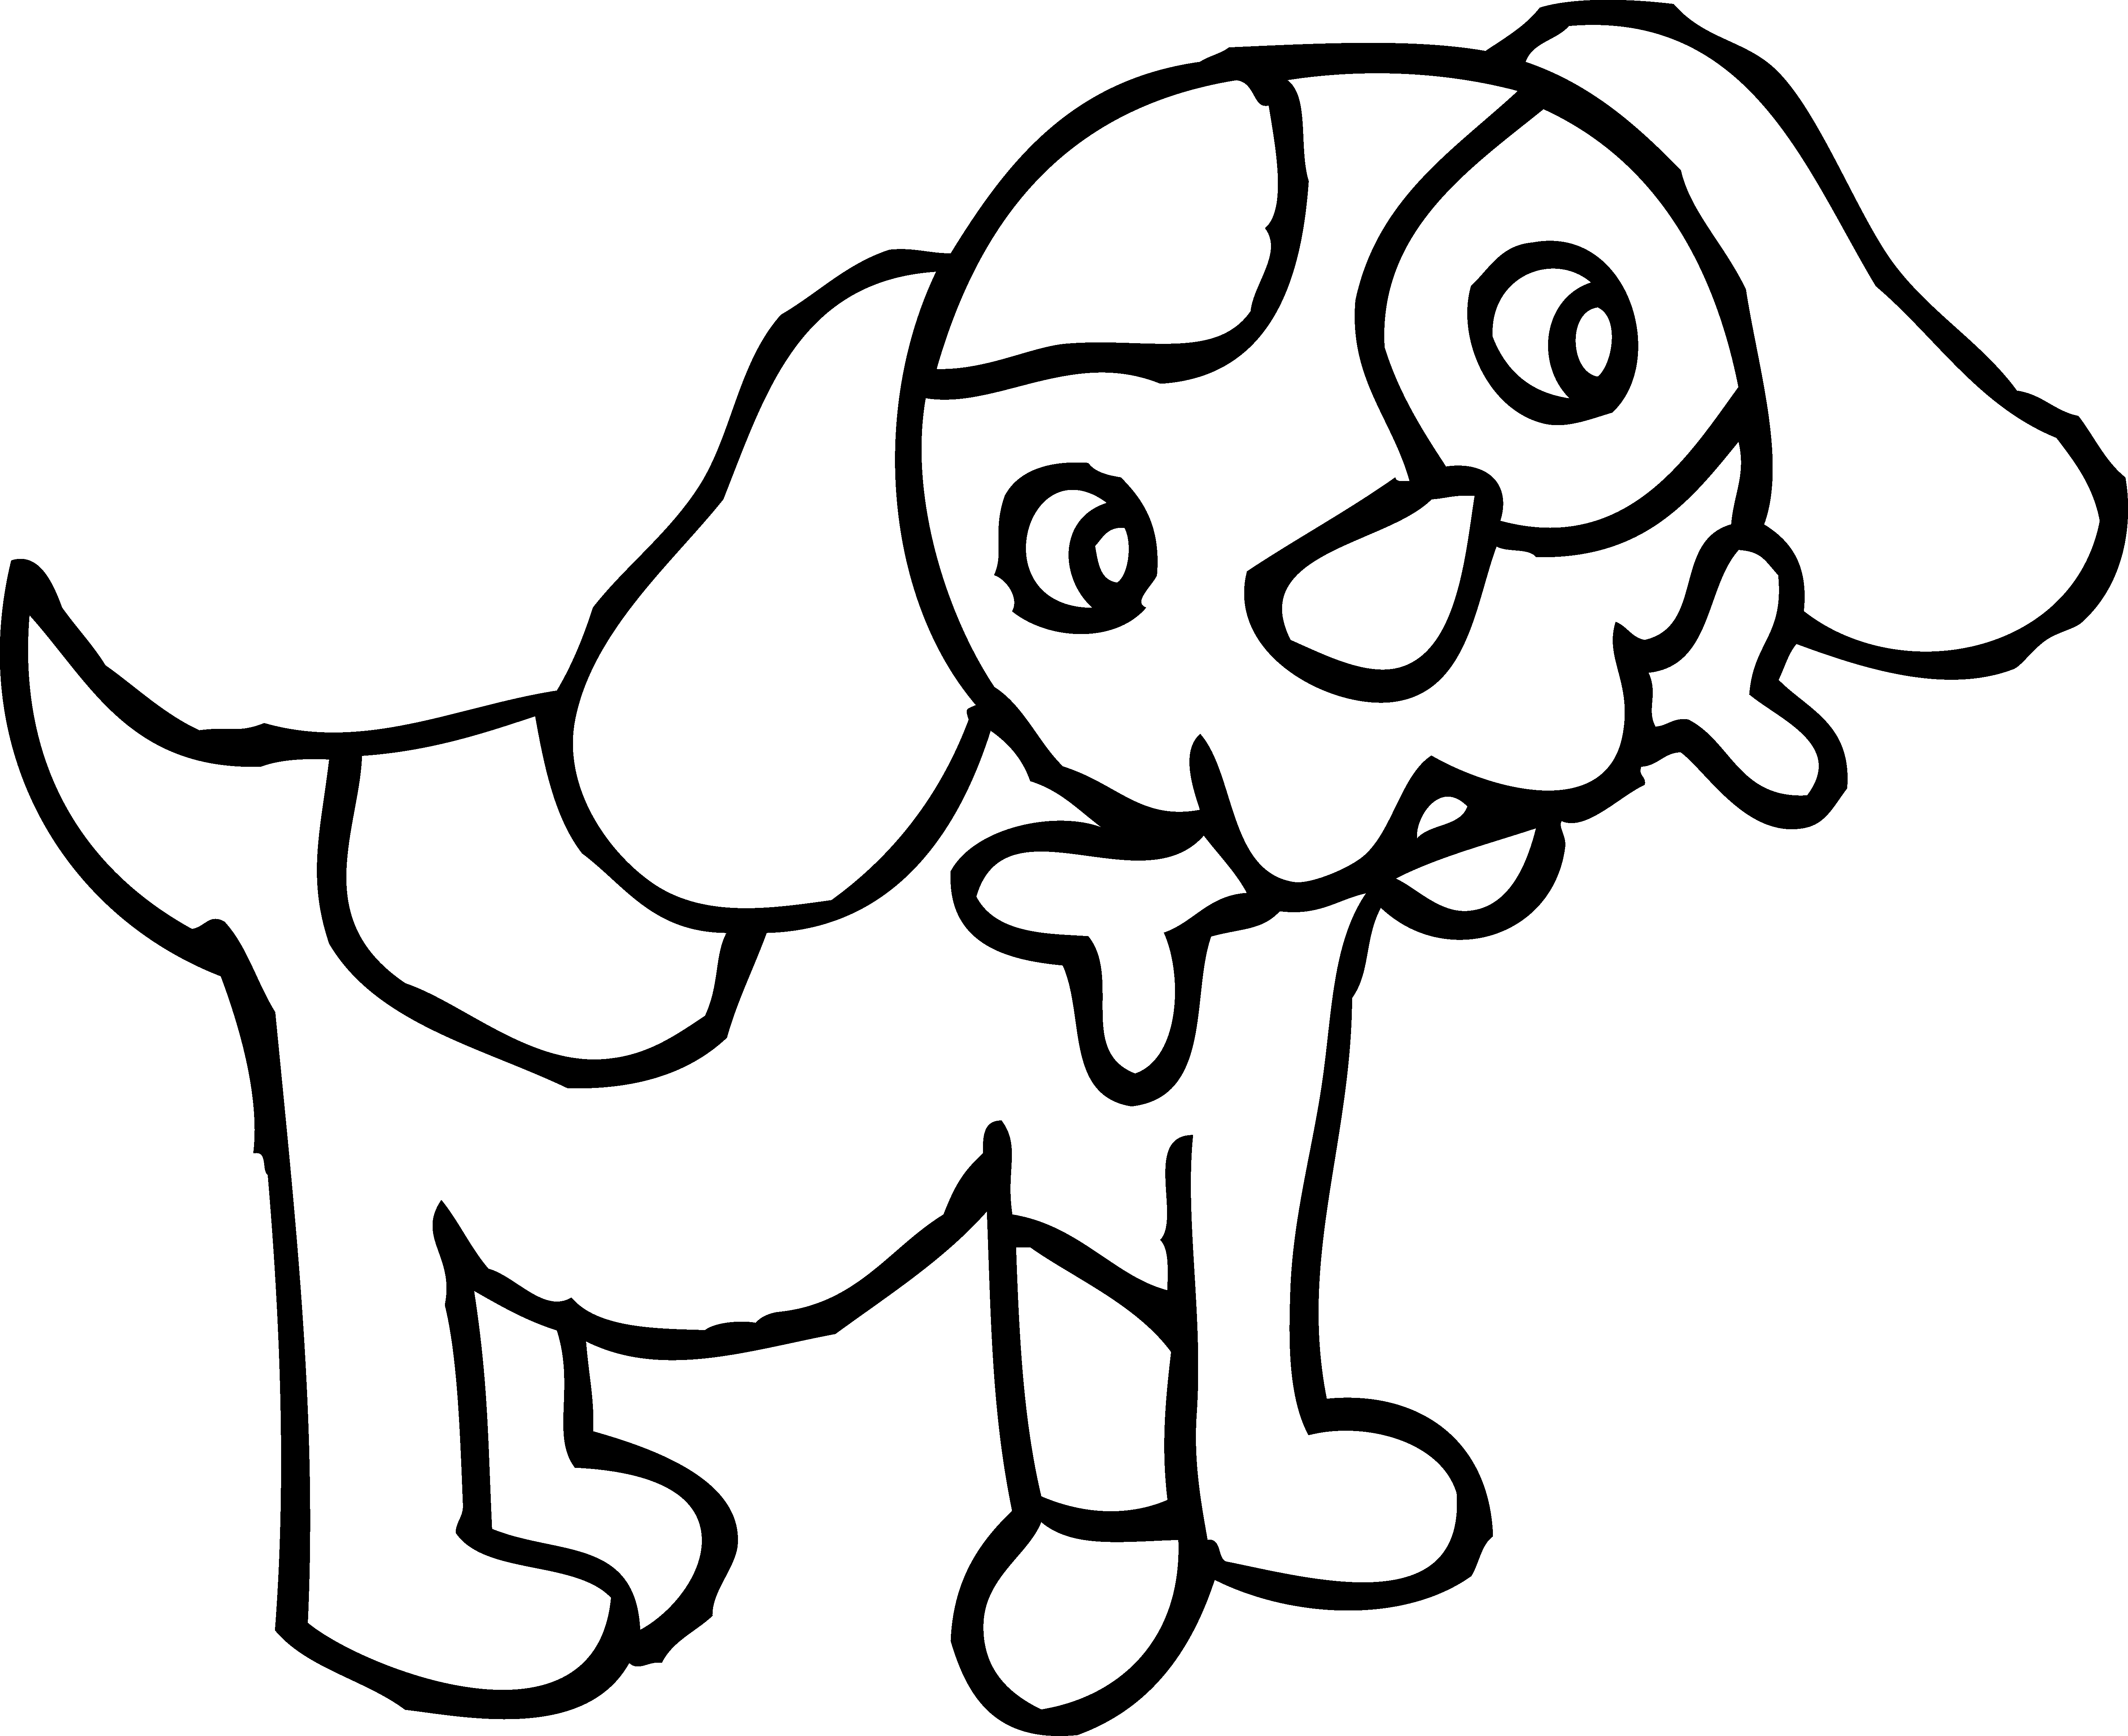 Bones clipart drawn. Coloring page of dog